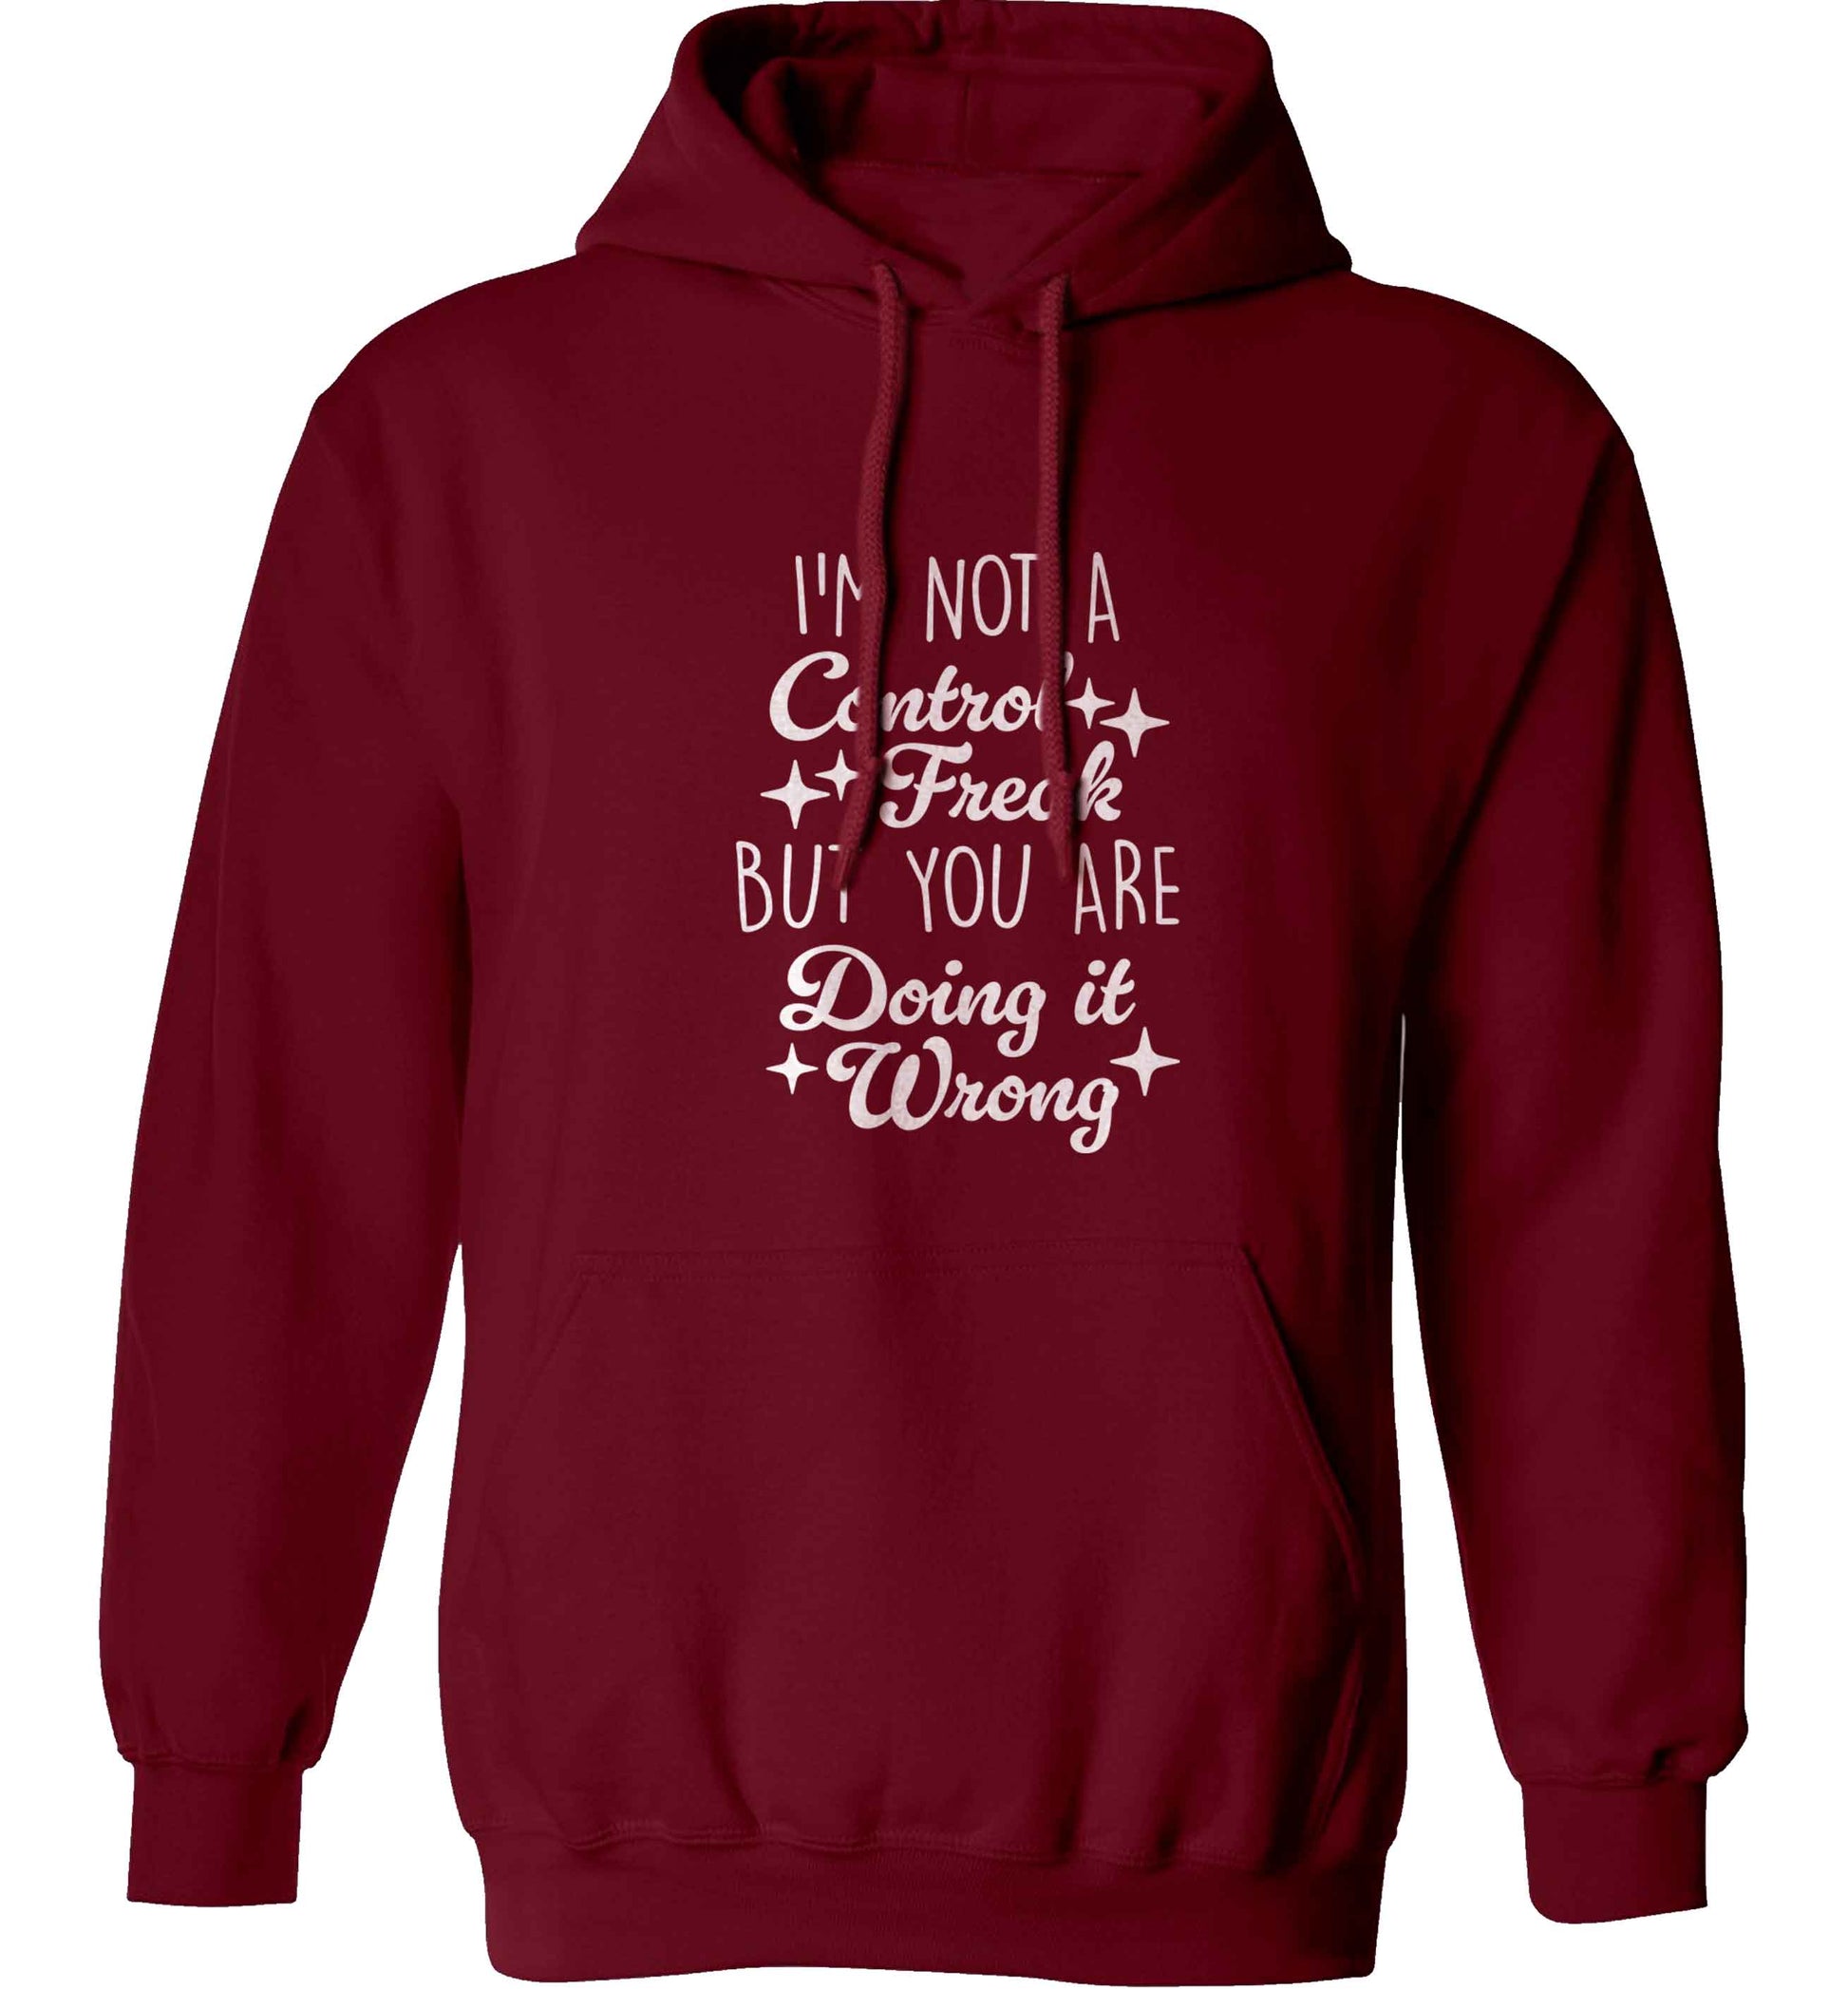 I'm not a control freak but you are doing it wrong adults unisex maroon hoodie 2XL